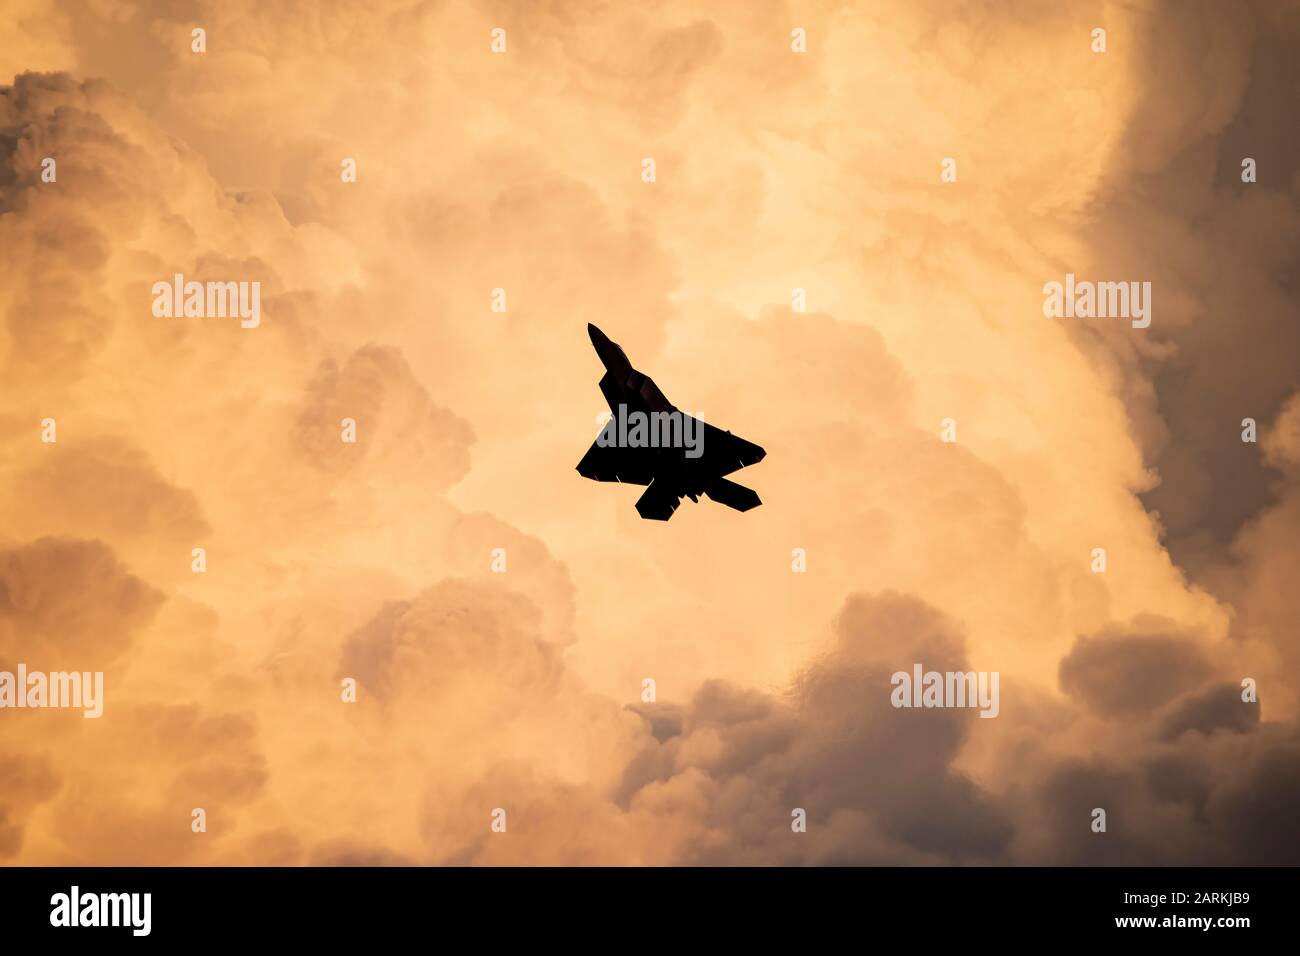 U.S. Air Force Maj. Paul Lopez, F-22 Demo Team commander, flies a twilight demonstration during EAA AirVenture in Oshkosh, Wis., July 28, 2019.  Founded in 2007, the F-22 Raptor Demo Team showcases the unique capabilities of the world's premier 5th-generation fighter aircraft. (U.S. Air Force photo by 2nd Lt. Samuel Eckholm) Stock Photo